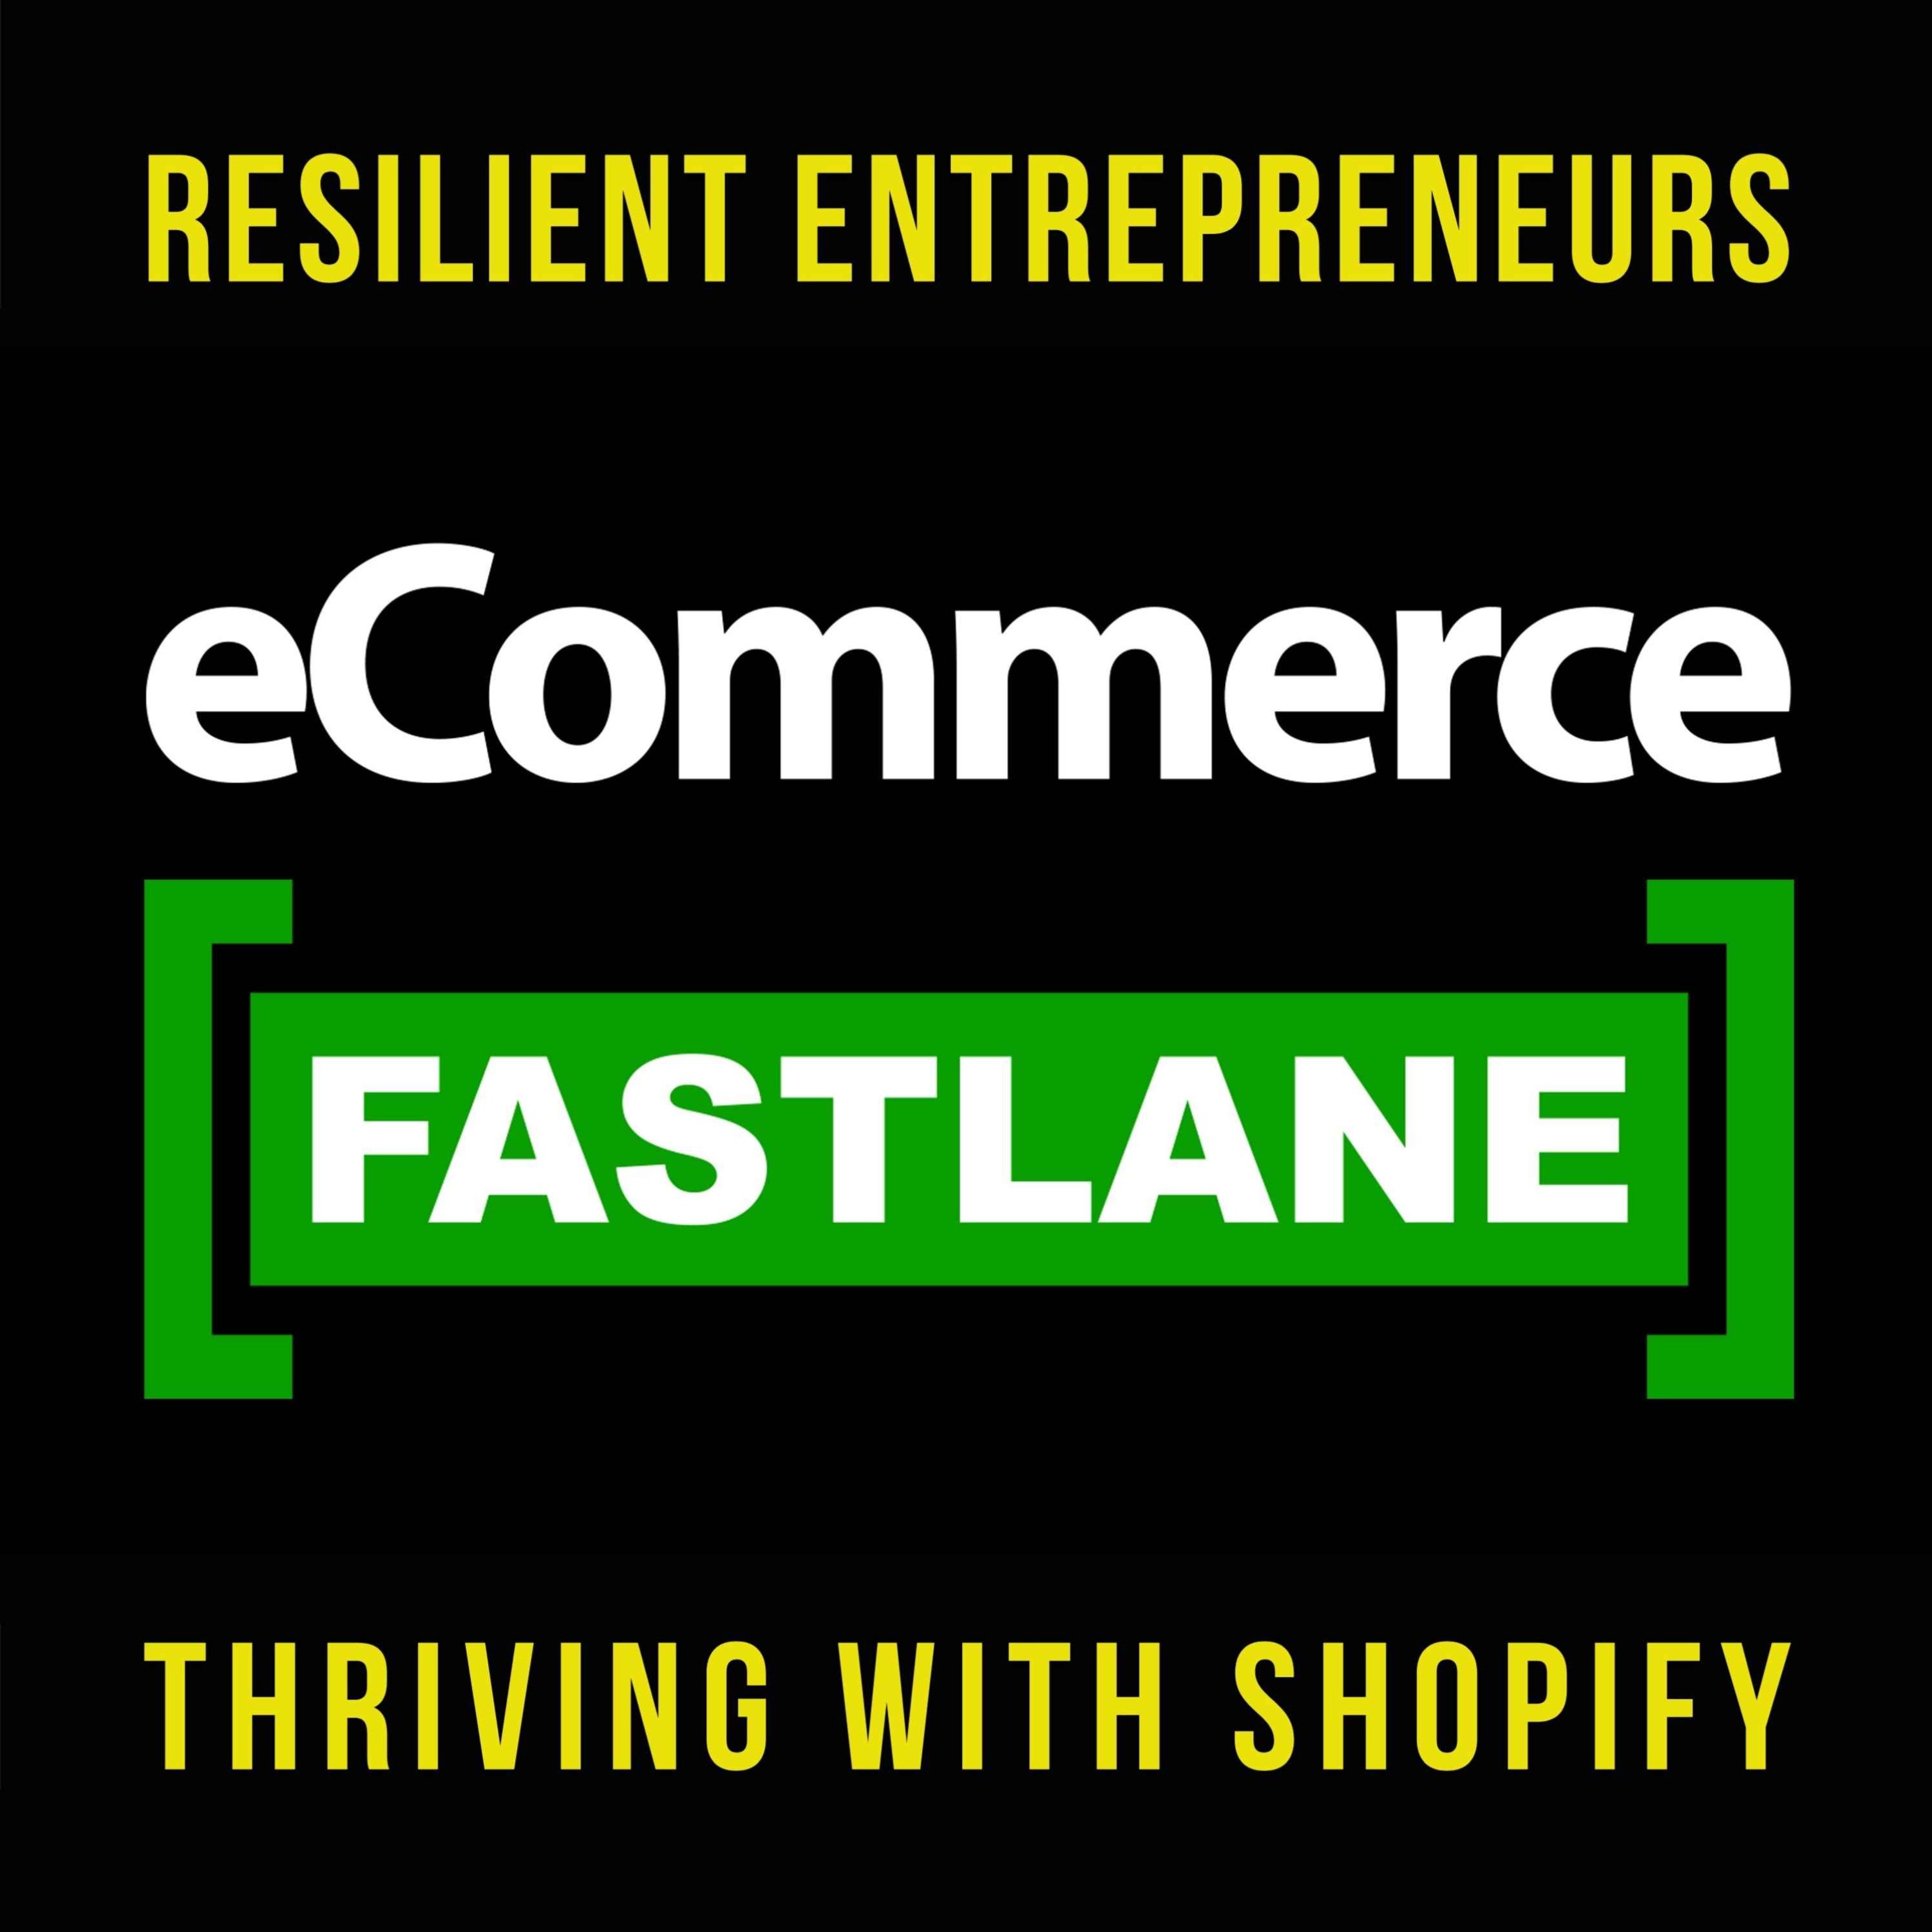 The World’s Fastest-Growing Shopify Brands Acquire The Most New Customers Through Referrals